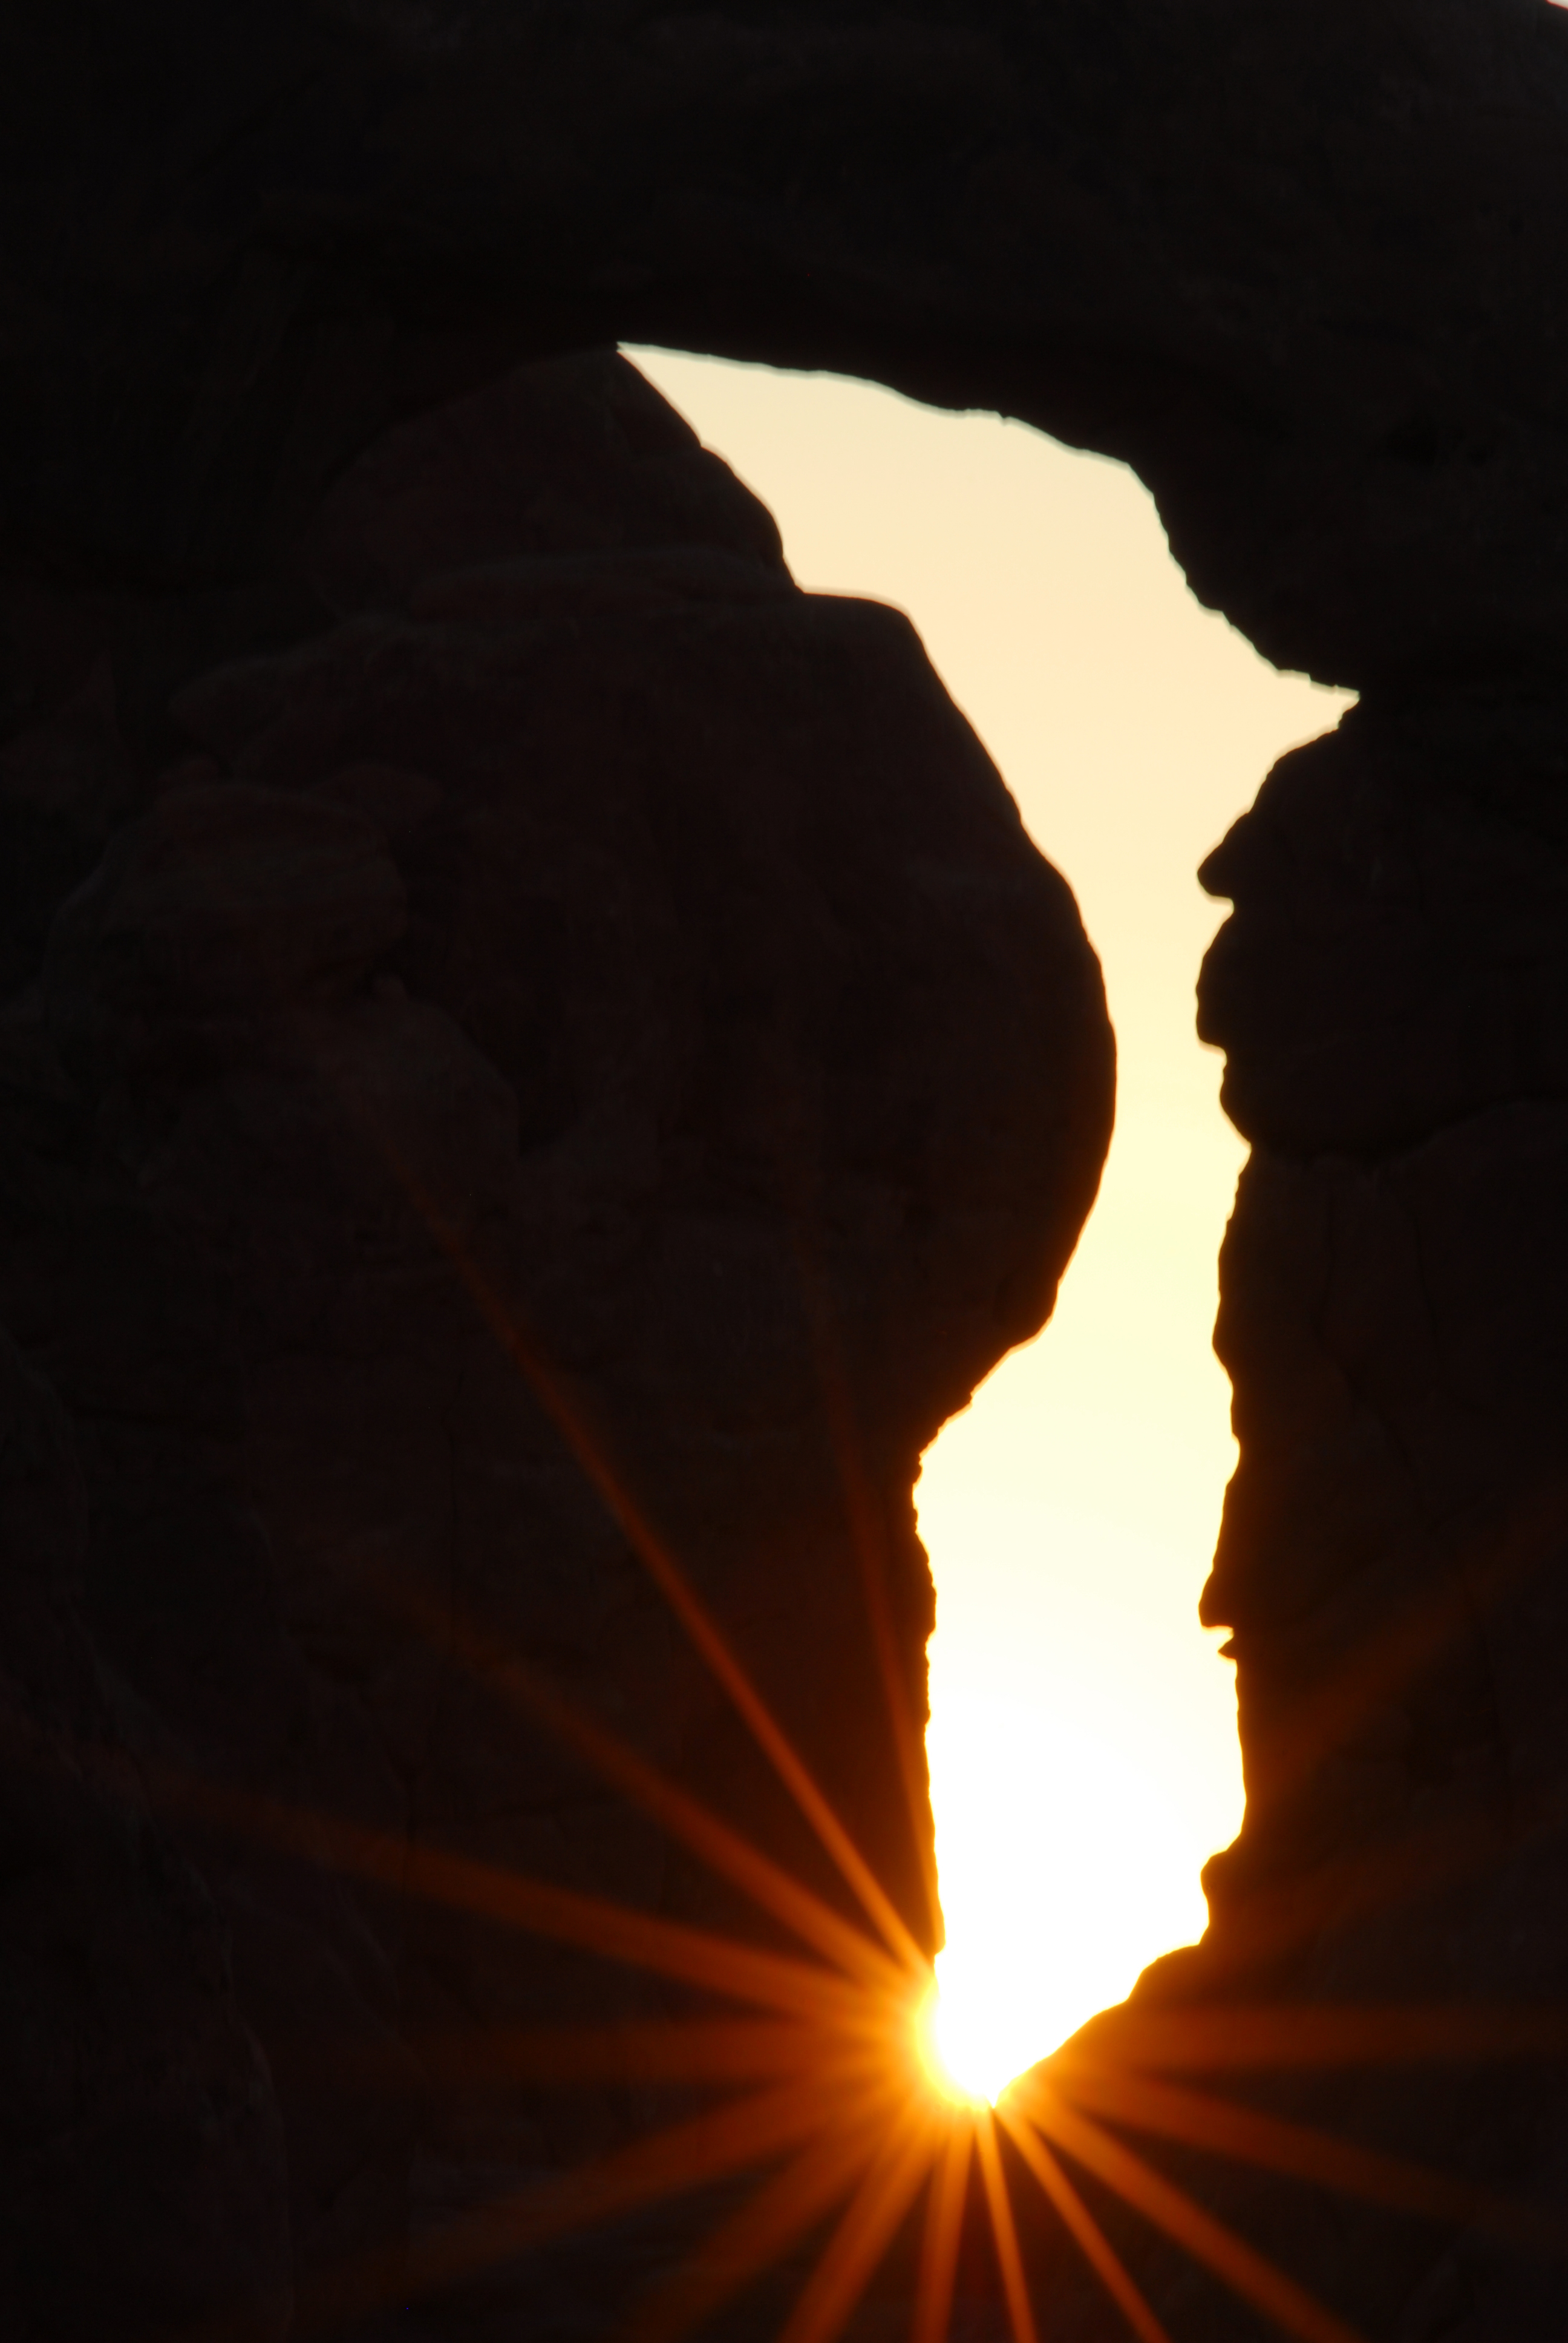 Sunstar through Turret Arch  -  Windows Section, Arches National Park, Utah  